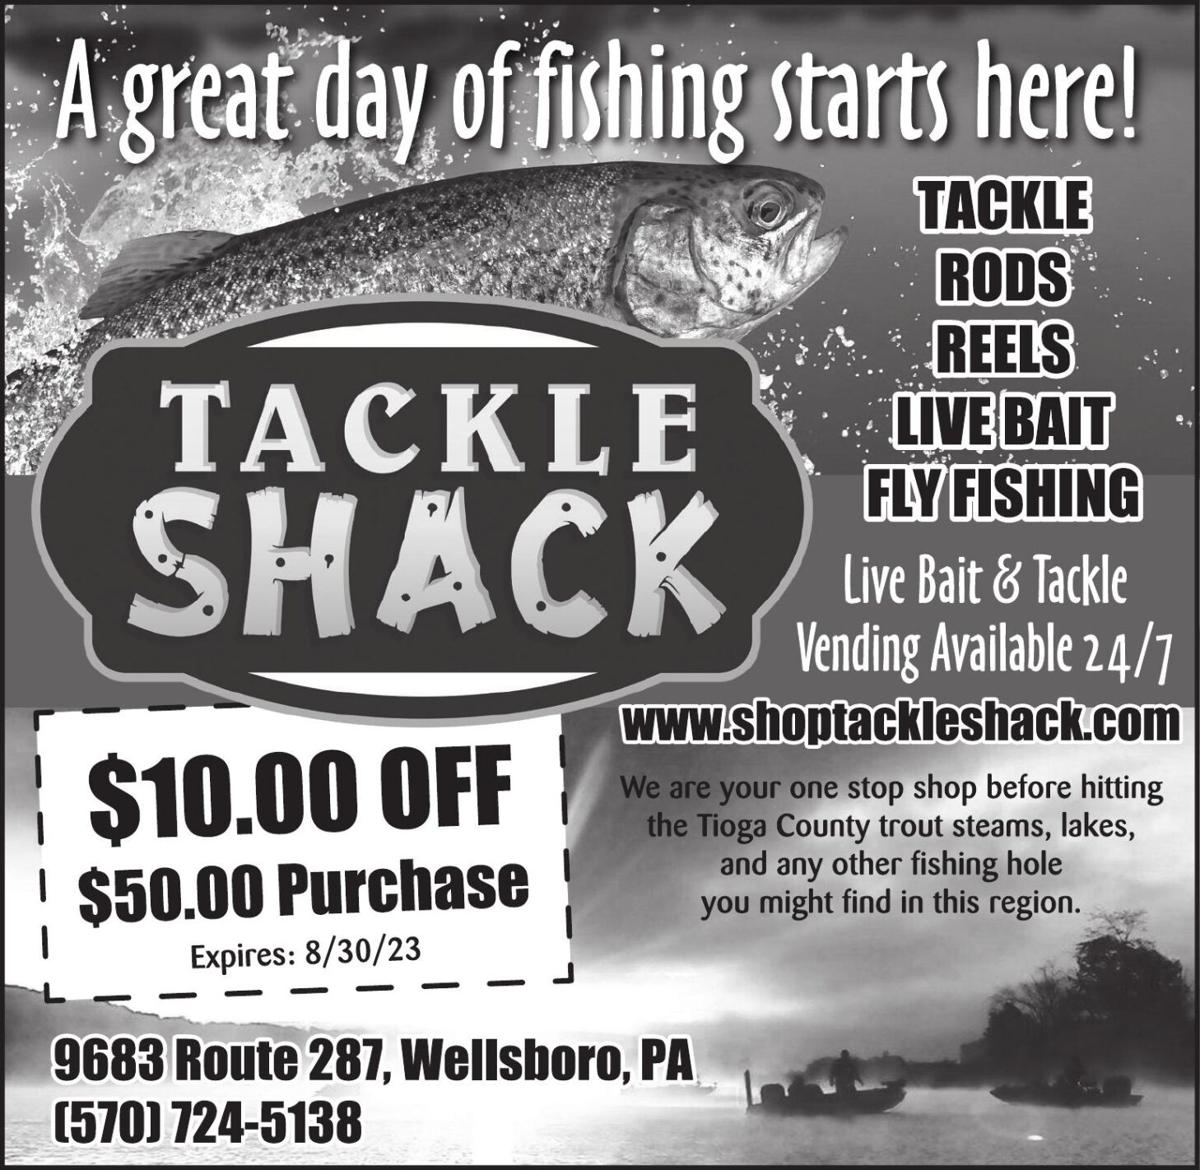 Wellsboro Tackle Shack- A Great Day of Fishing Starts Here